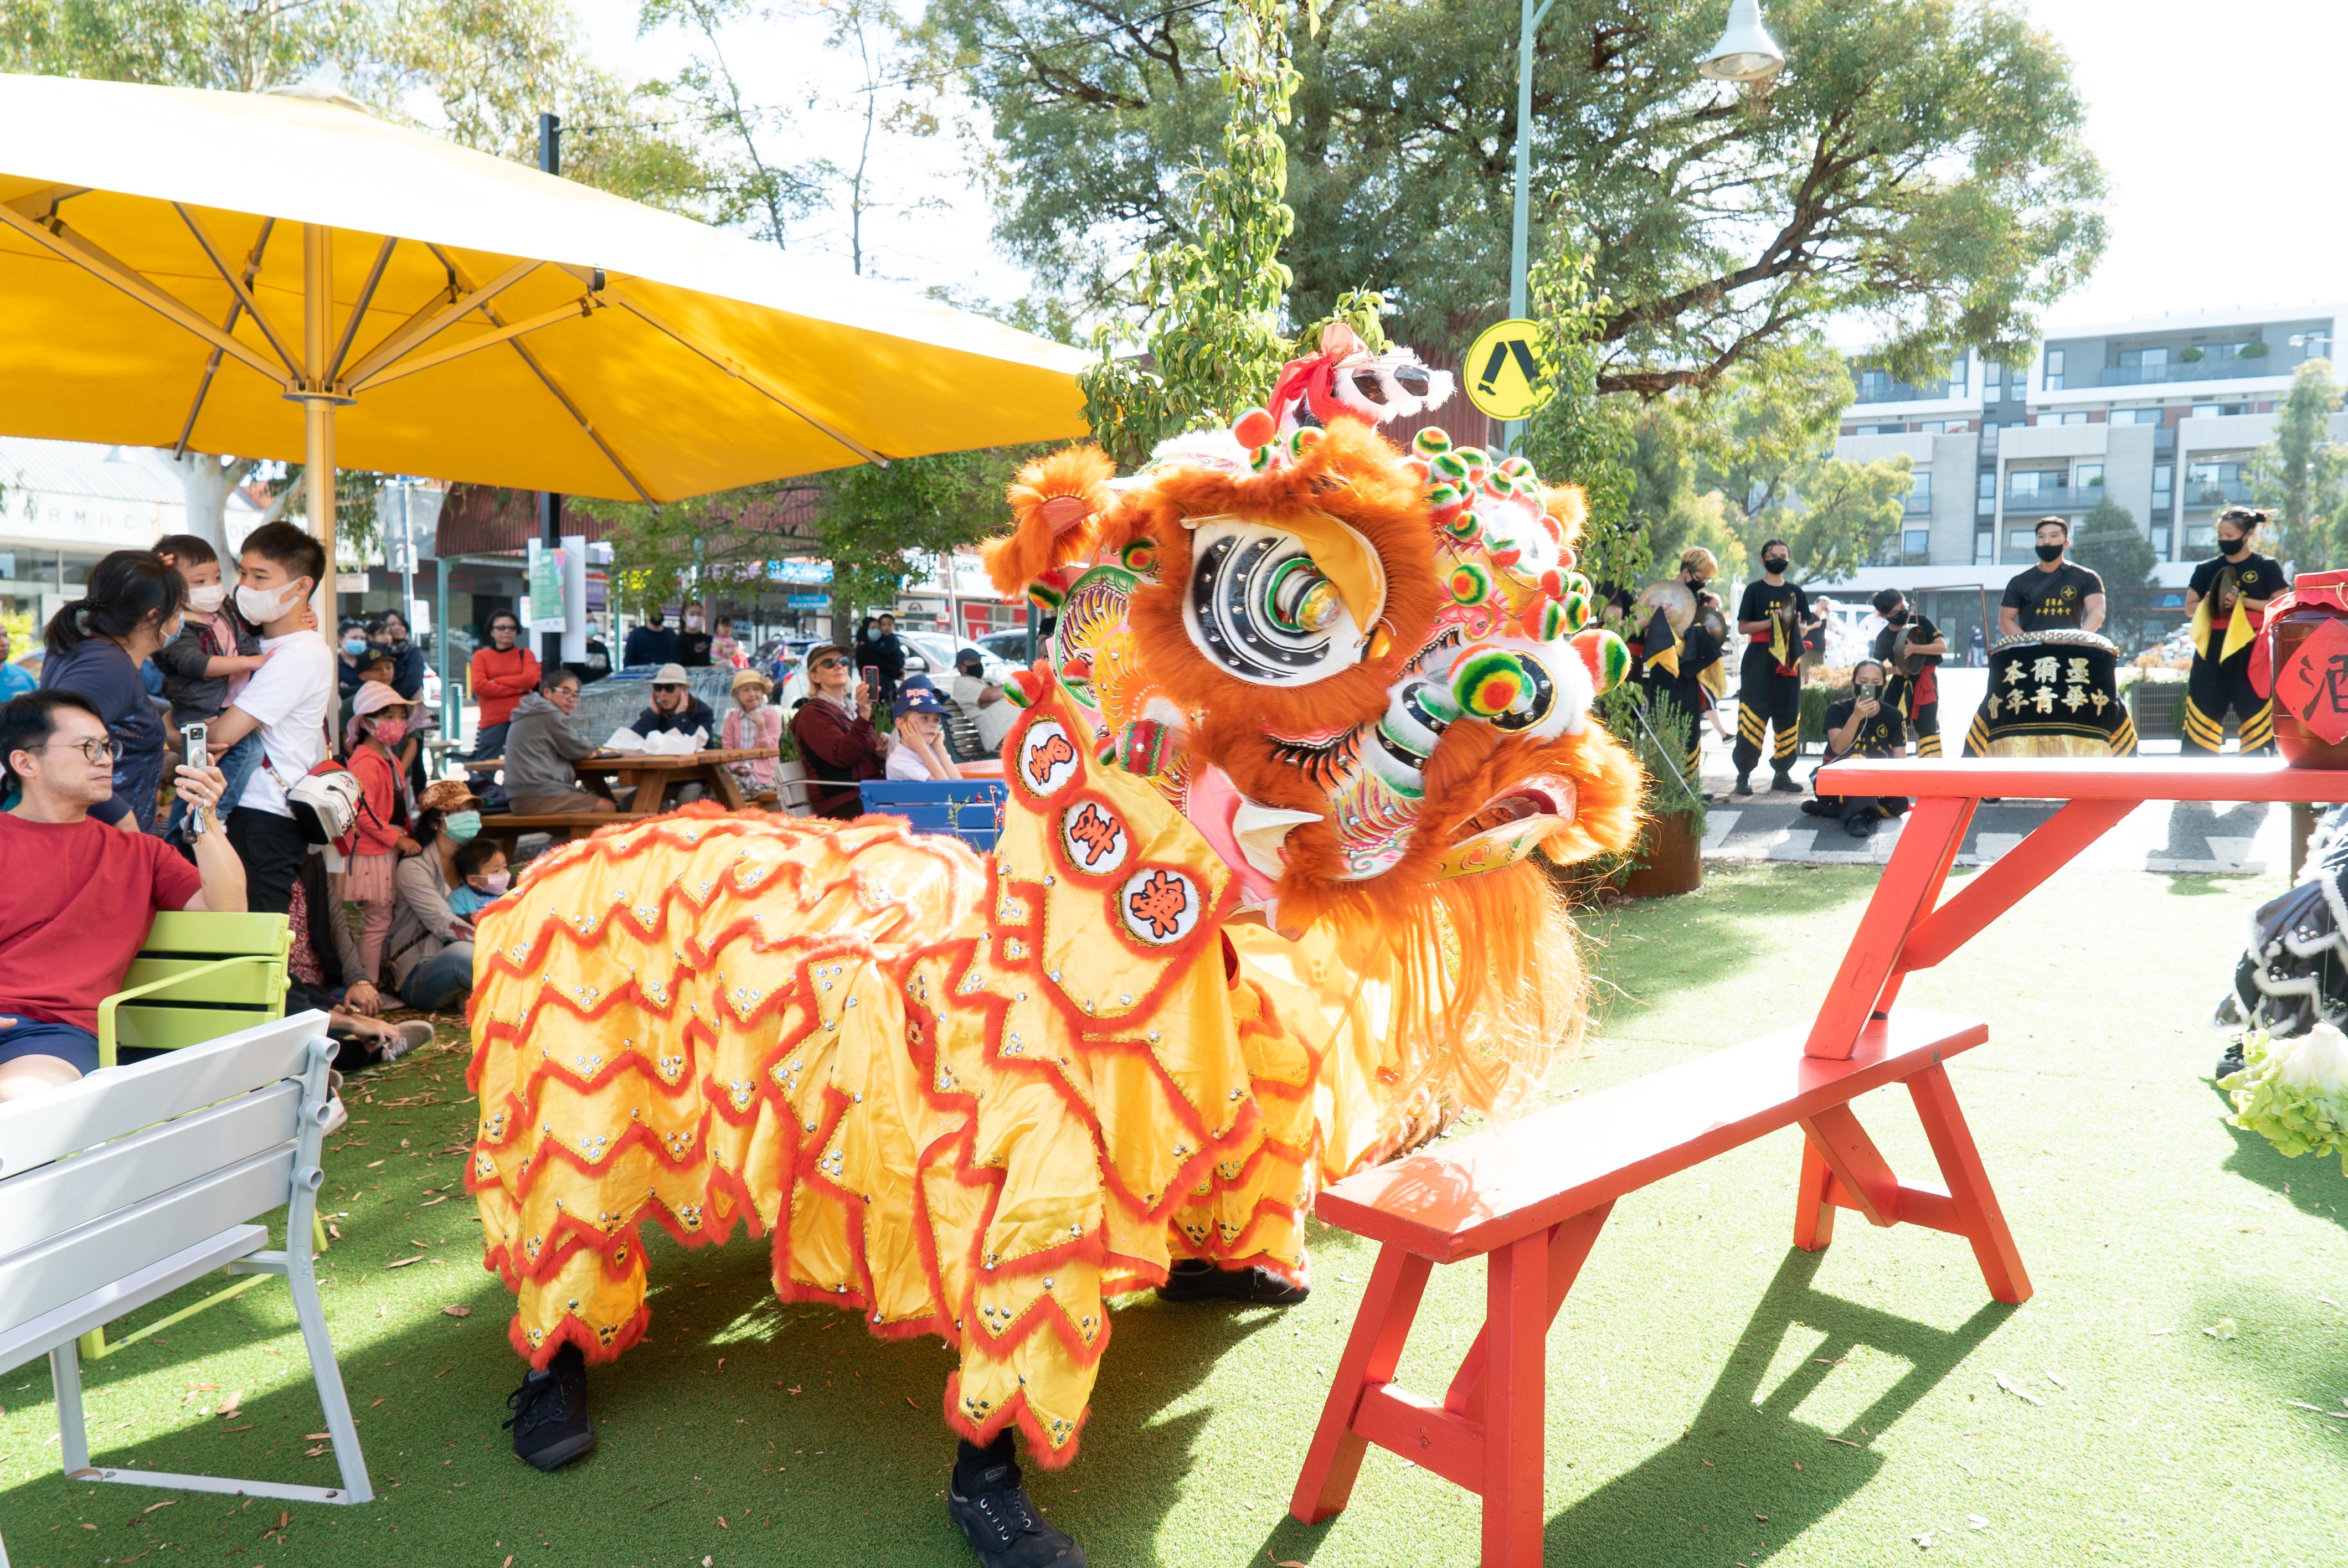 Orange and red Chinese dragon performs for a crowd of onlookers at an outdoor shopping strip